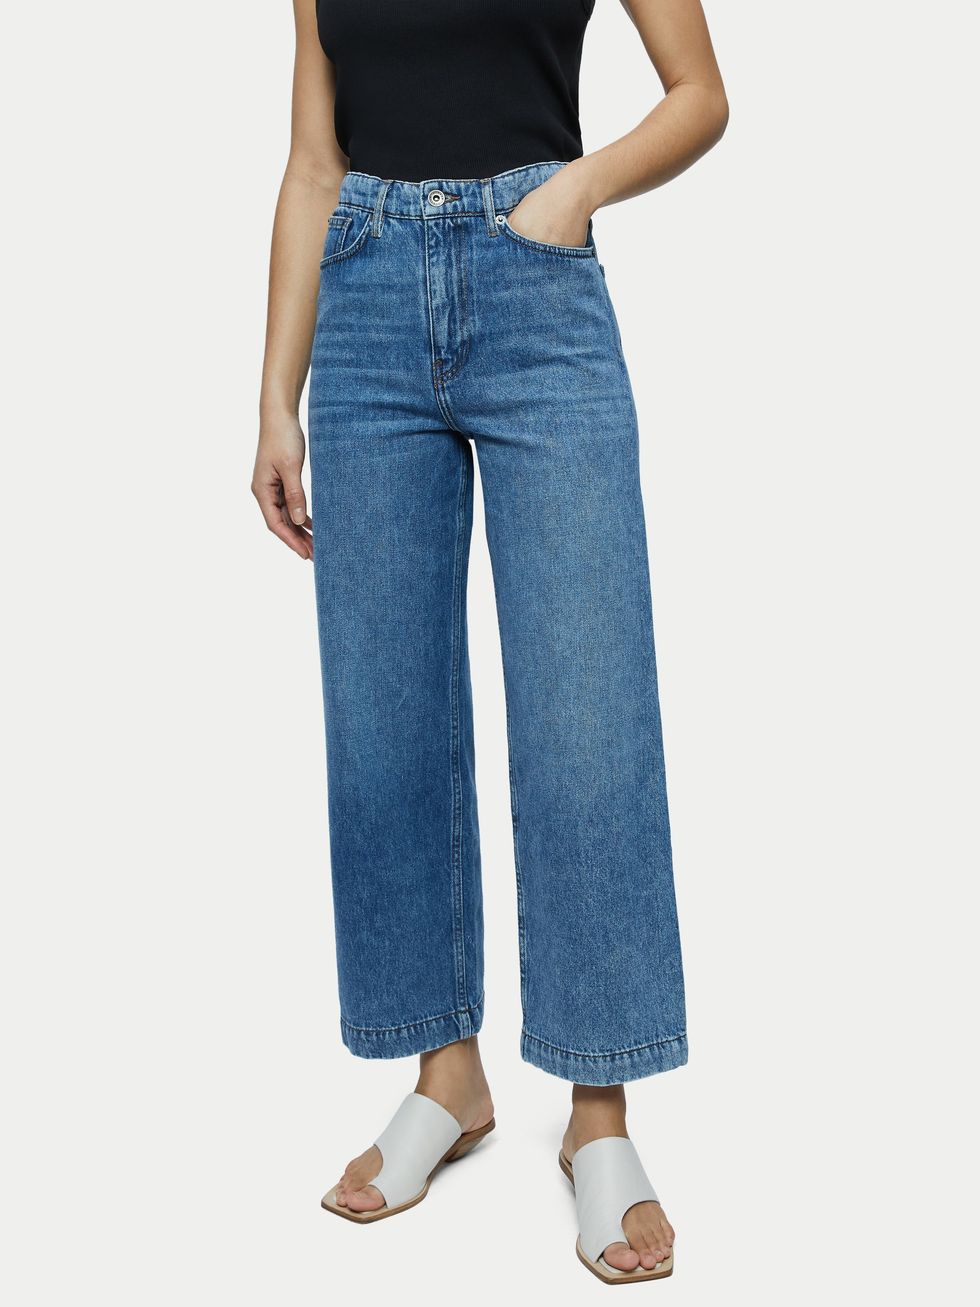 Best flared jeans UK 2023: Our top 10 pairs to buy now